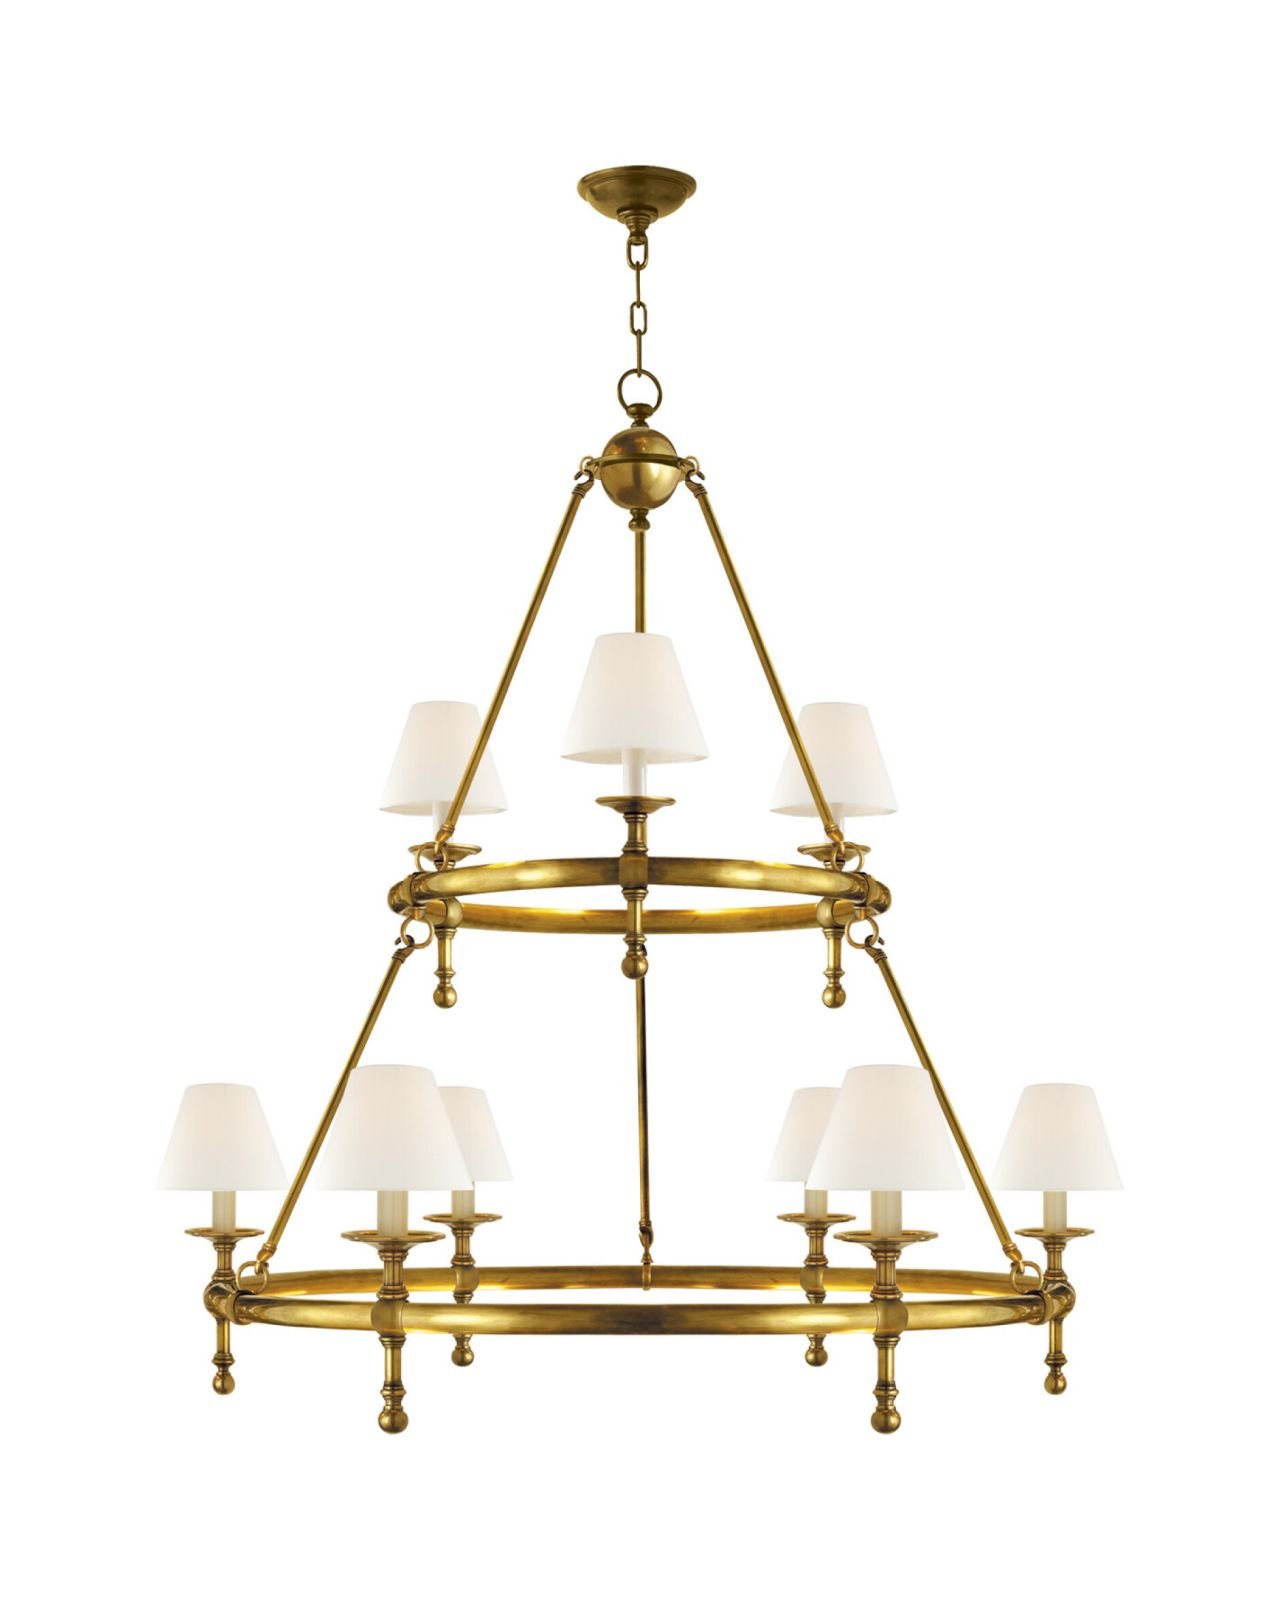 Two-Tier Ring Chandelier Antique Brass